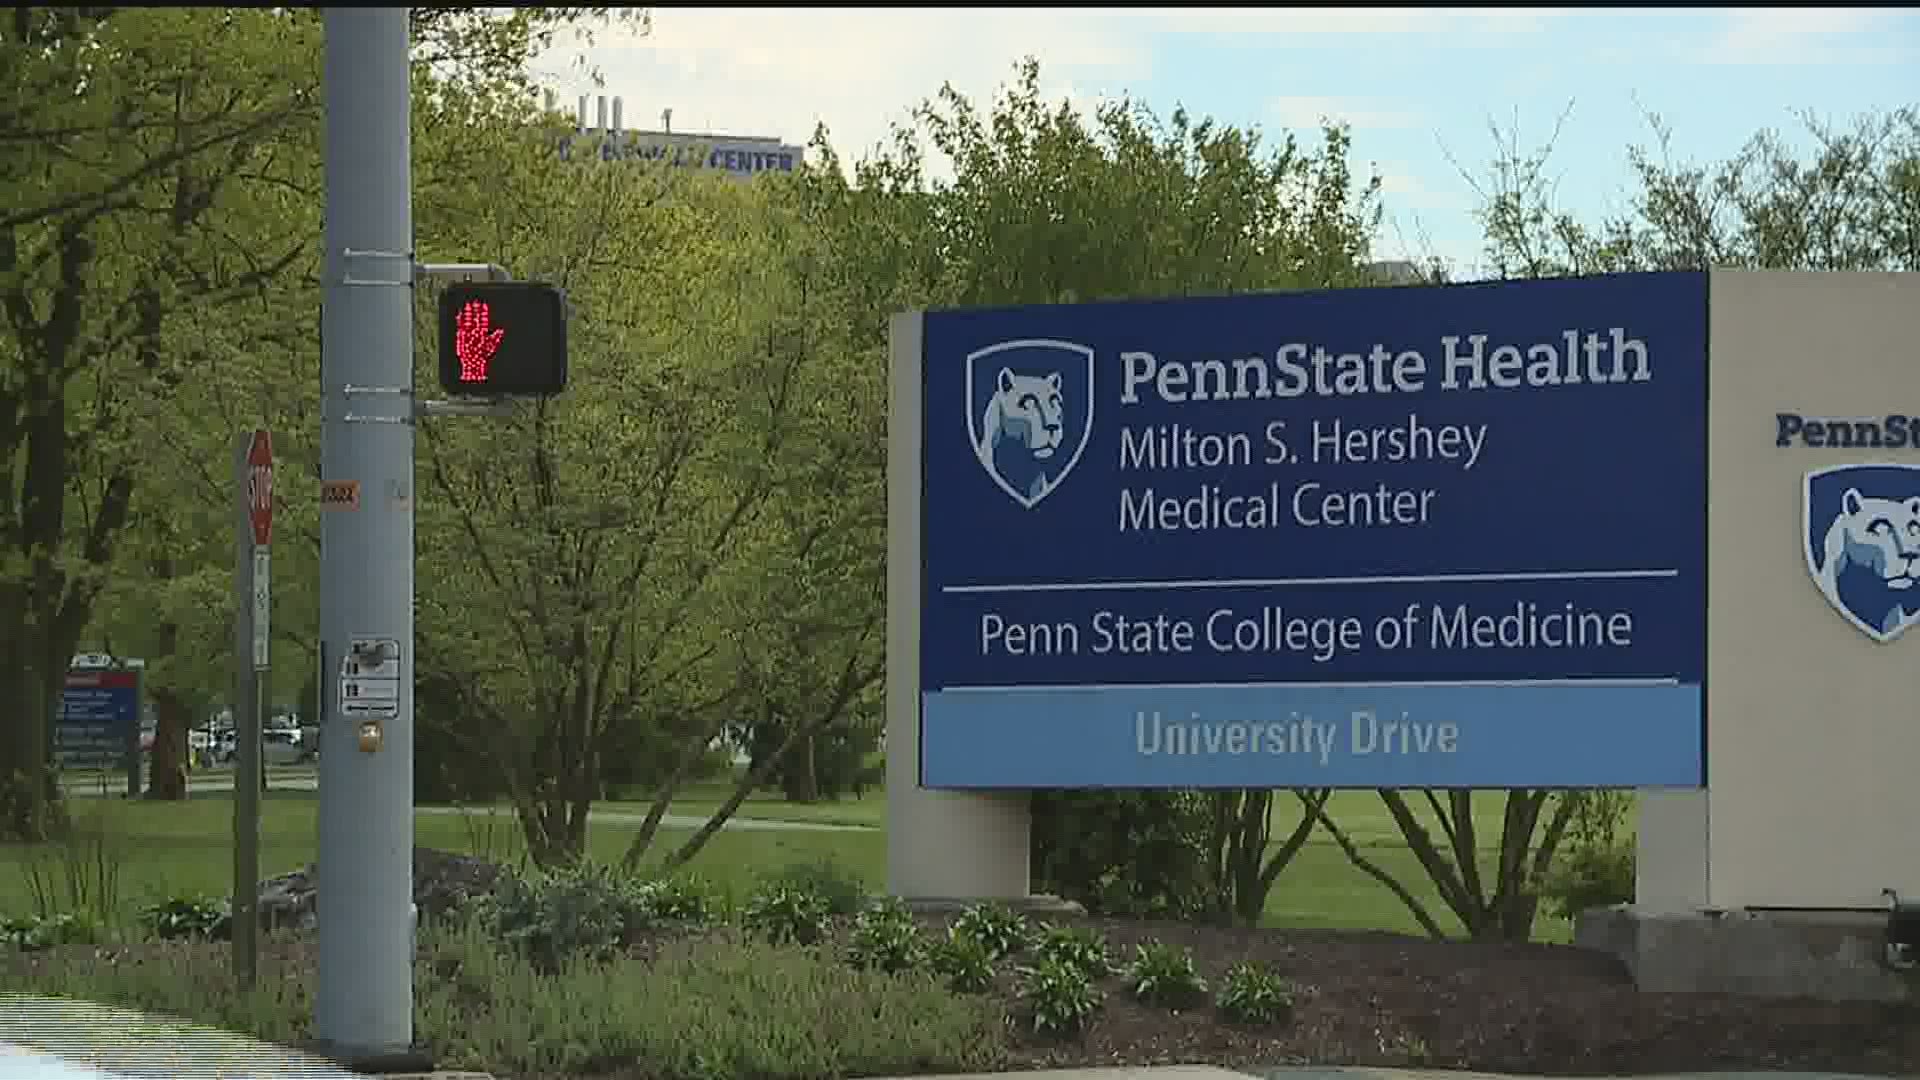 Penn State Health will still restrict visitors as they 'gradually and systematically' resume standard patient appointments